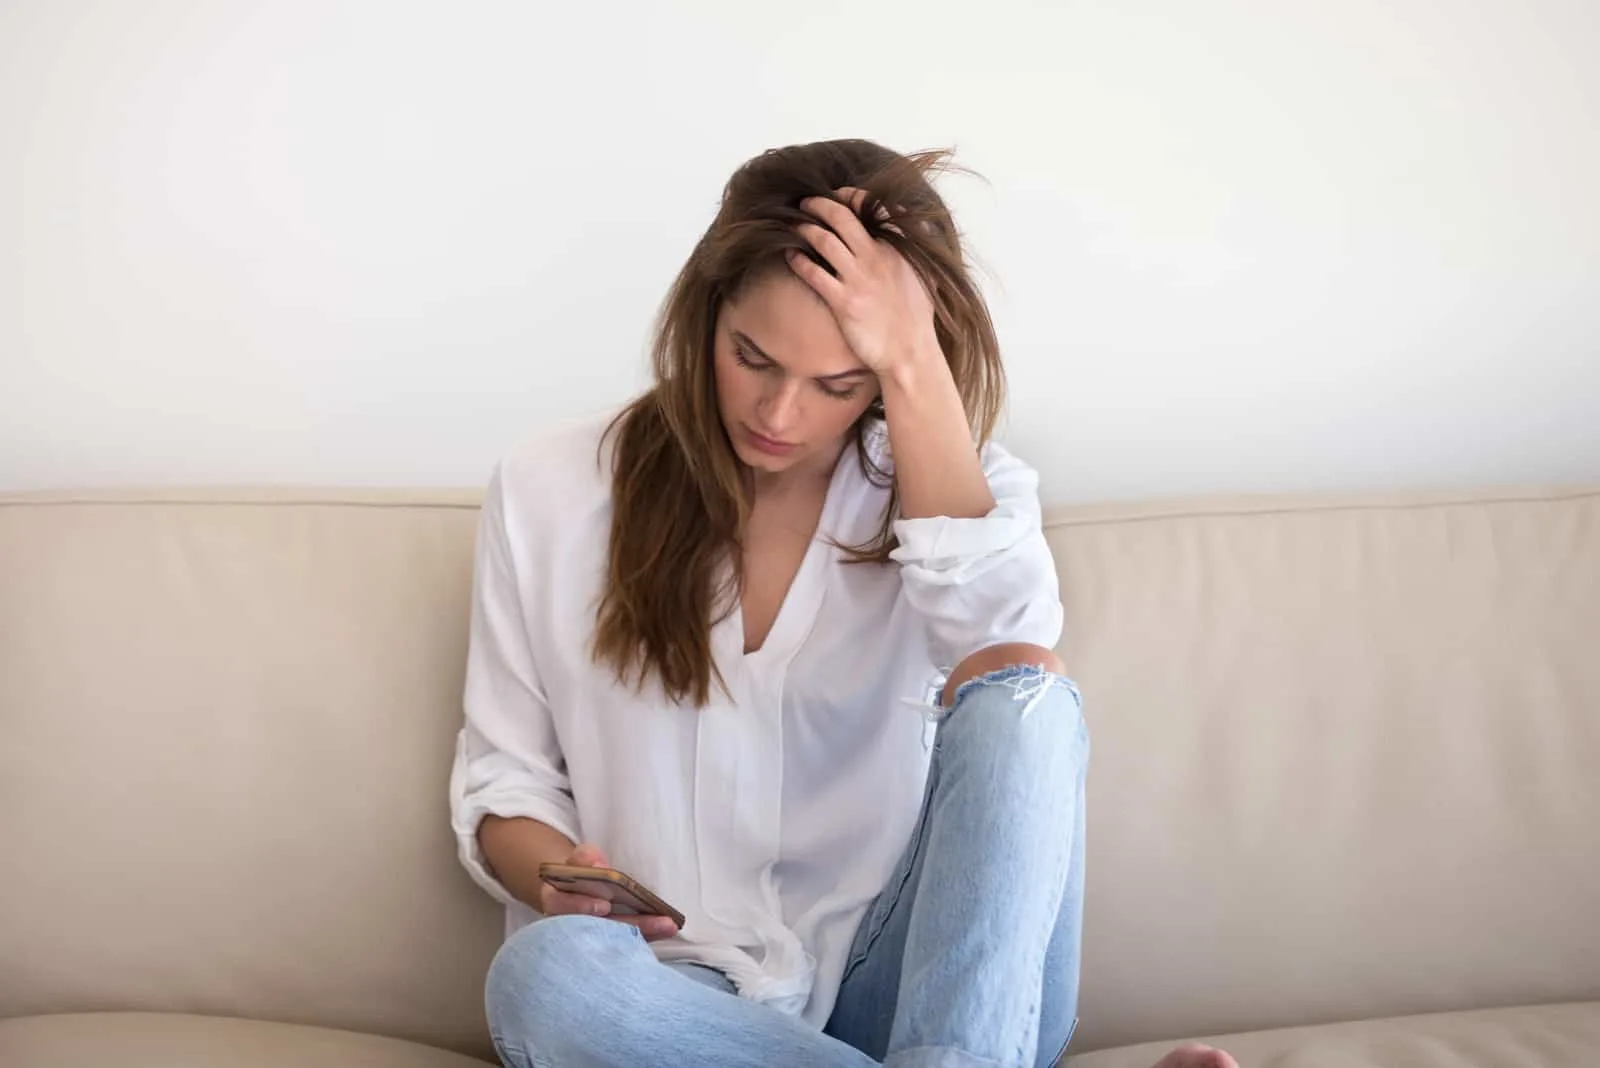 sad young woman looking at mobile phone on the couch